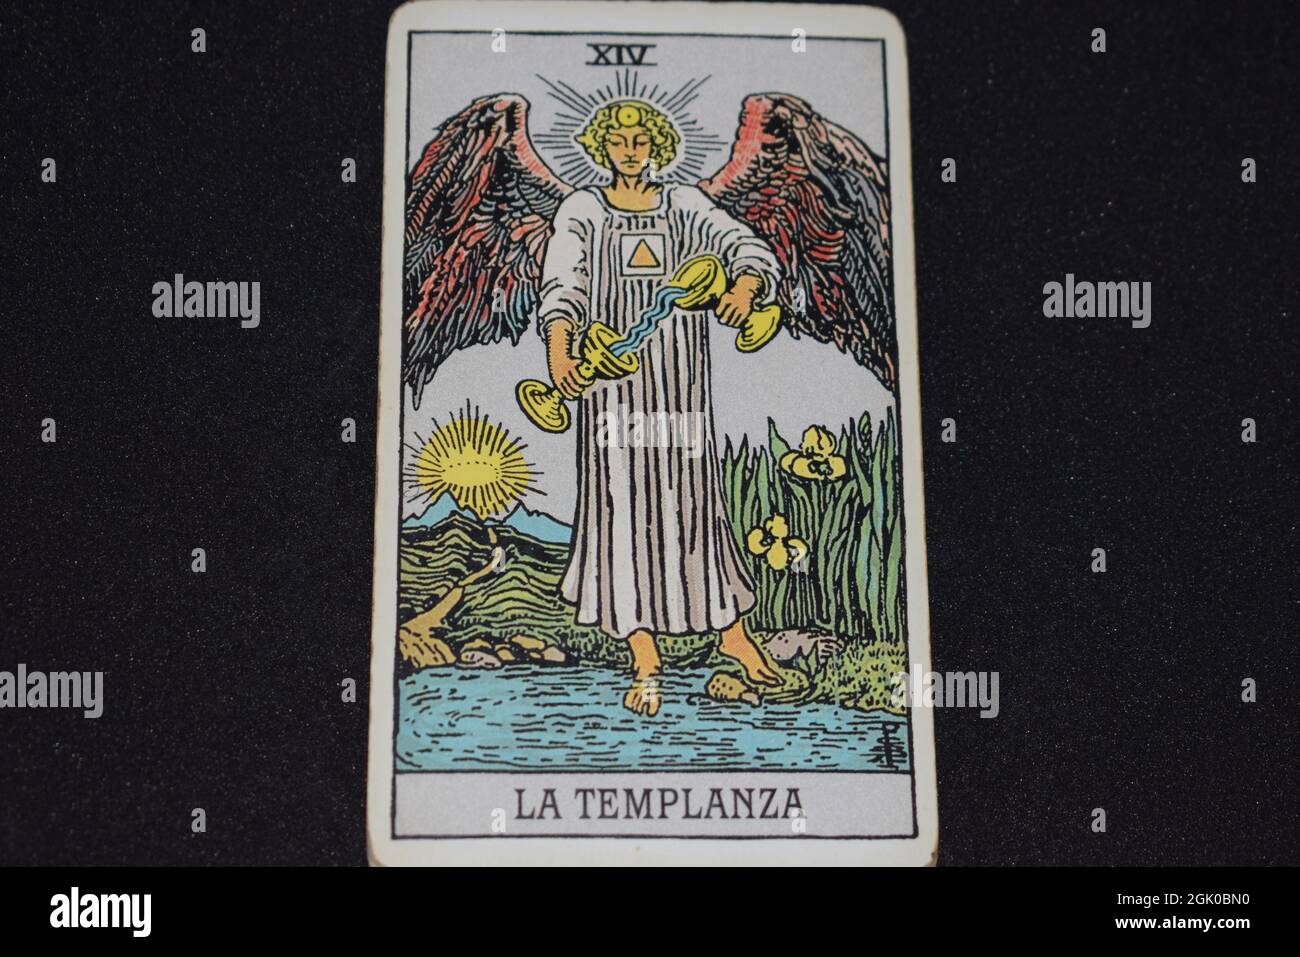 The tarot card number 14 represents THE TEMPERANCE in the tarot cards of the major arcana on a black background. Stock Photo